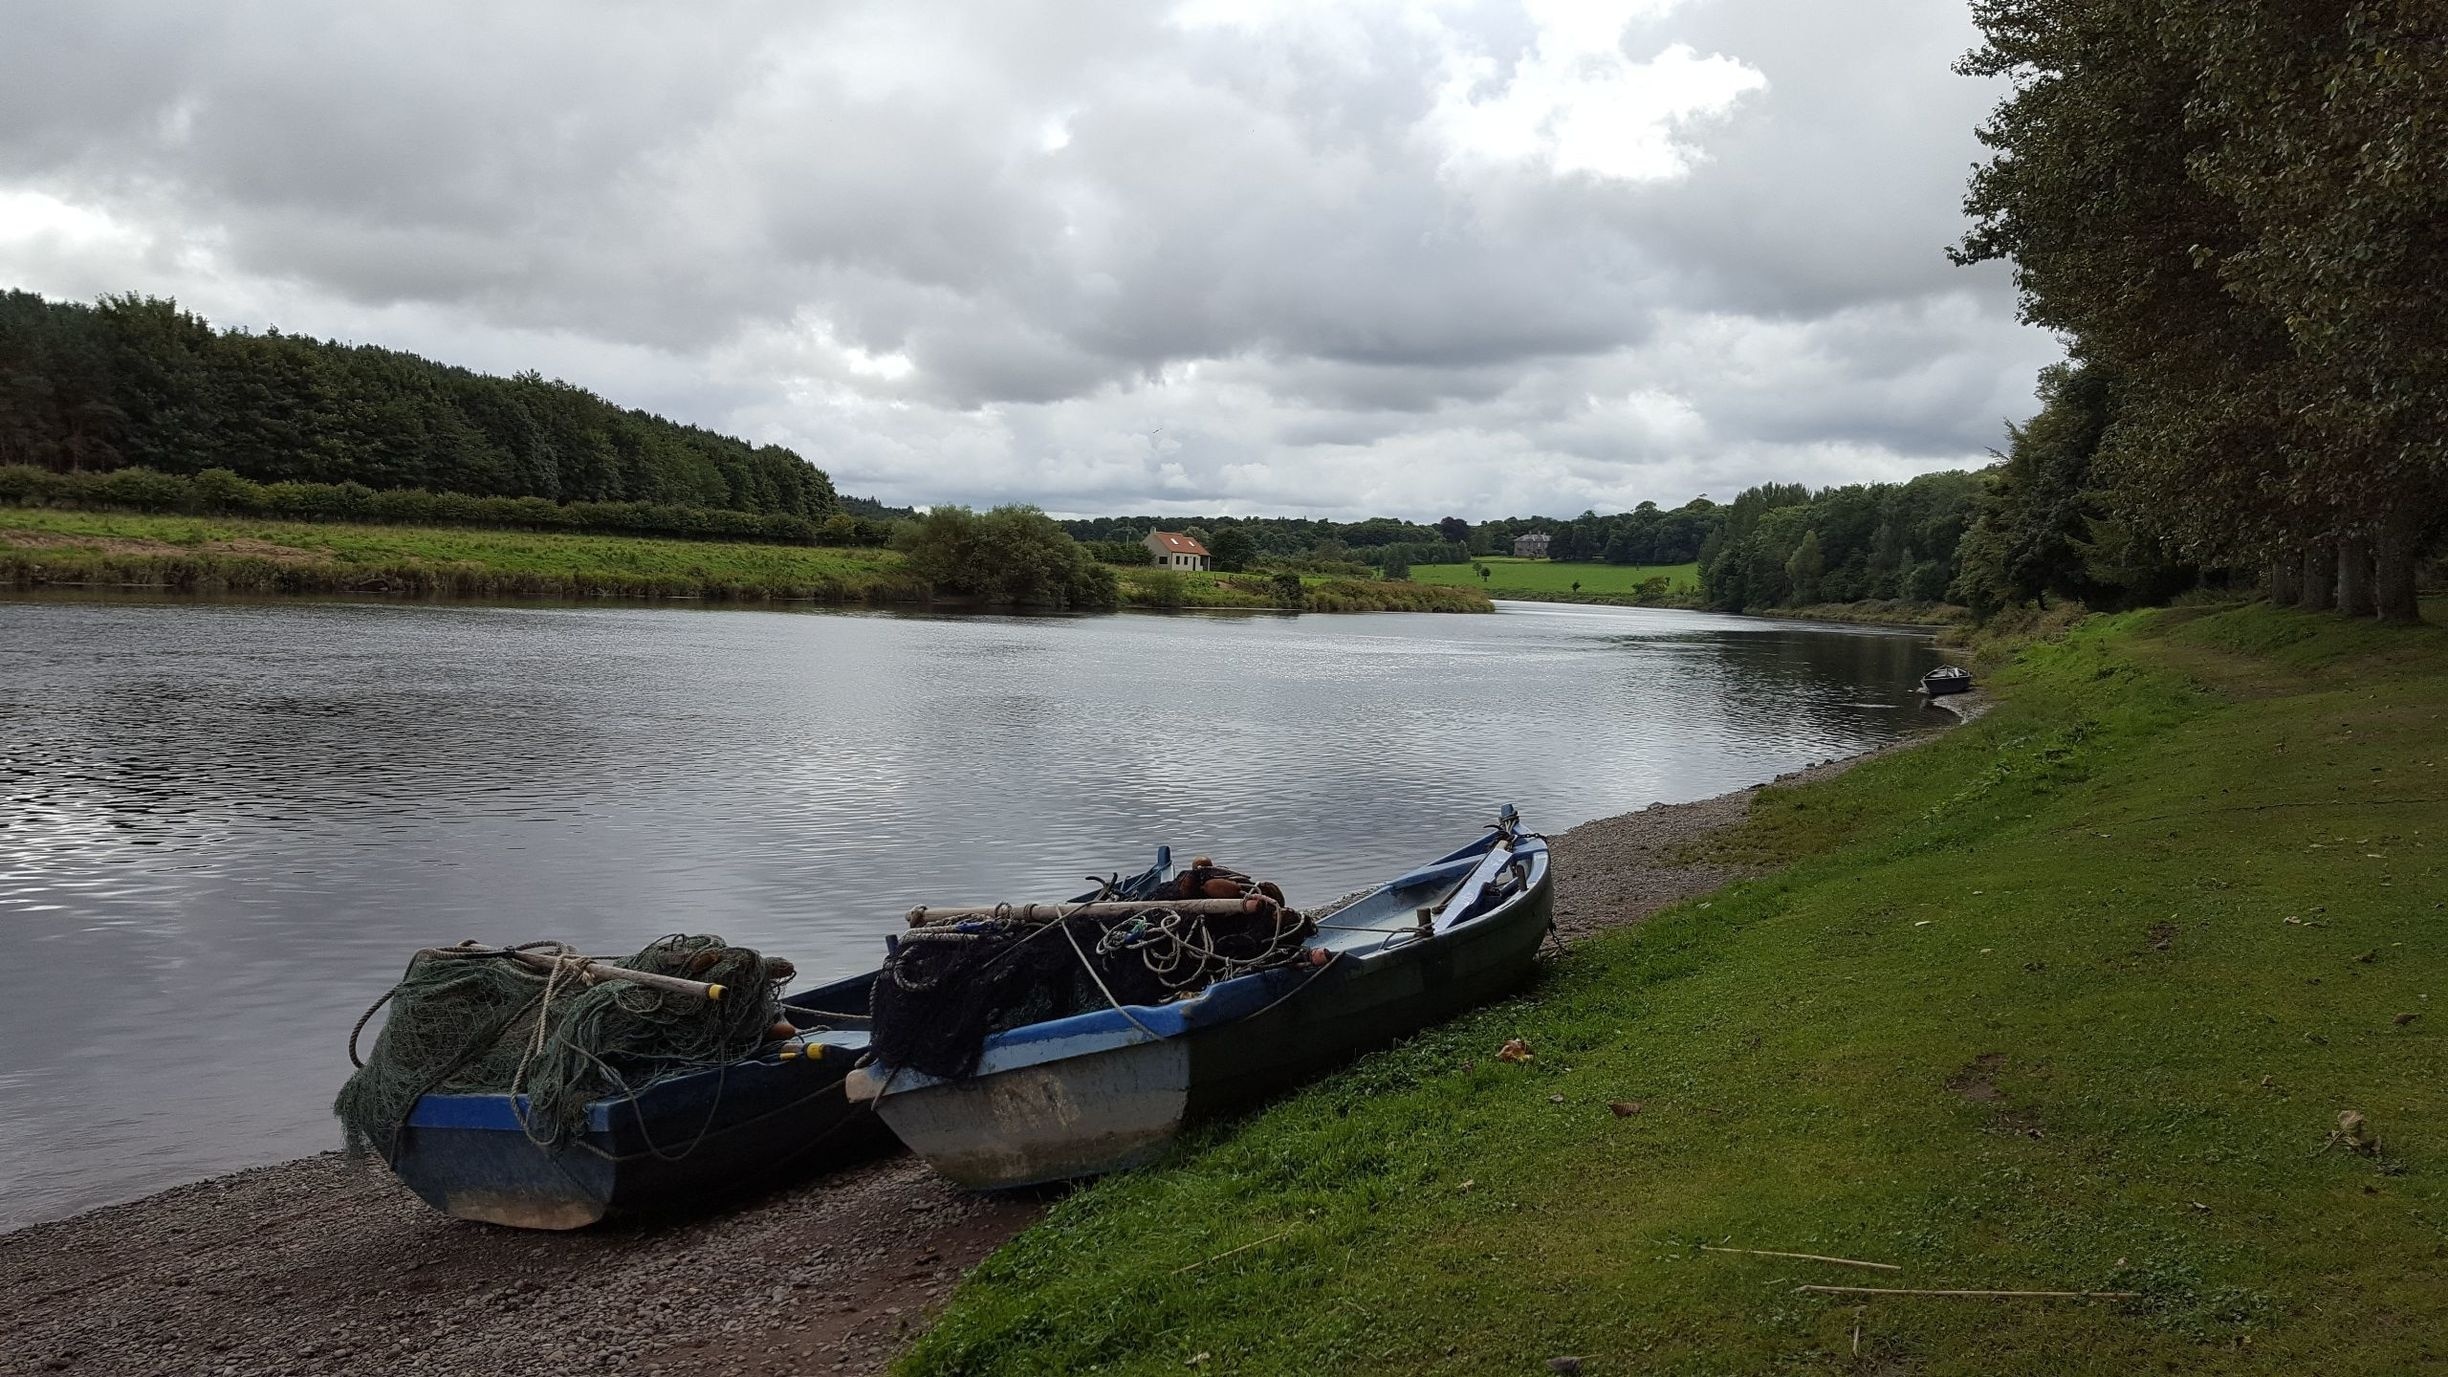 Salmon fishing on the river Tweed, beautiful stretch of river ❤